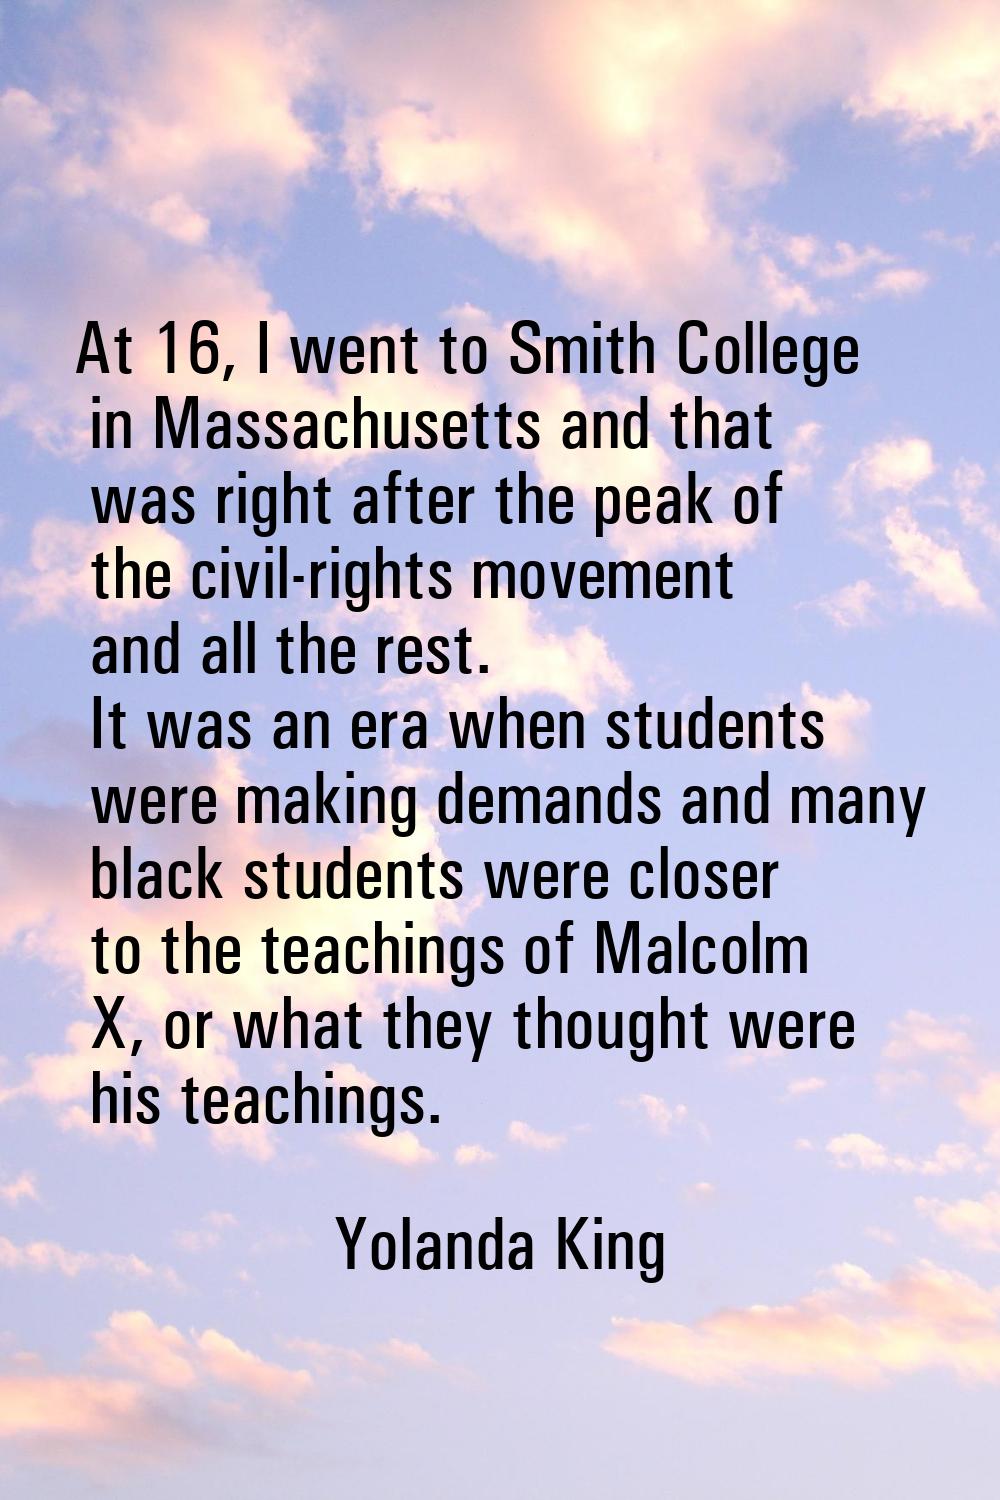 At 16, I went to Smith College in Massachusetts and that was right after the peak of the civil-righ